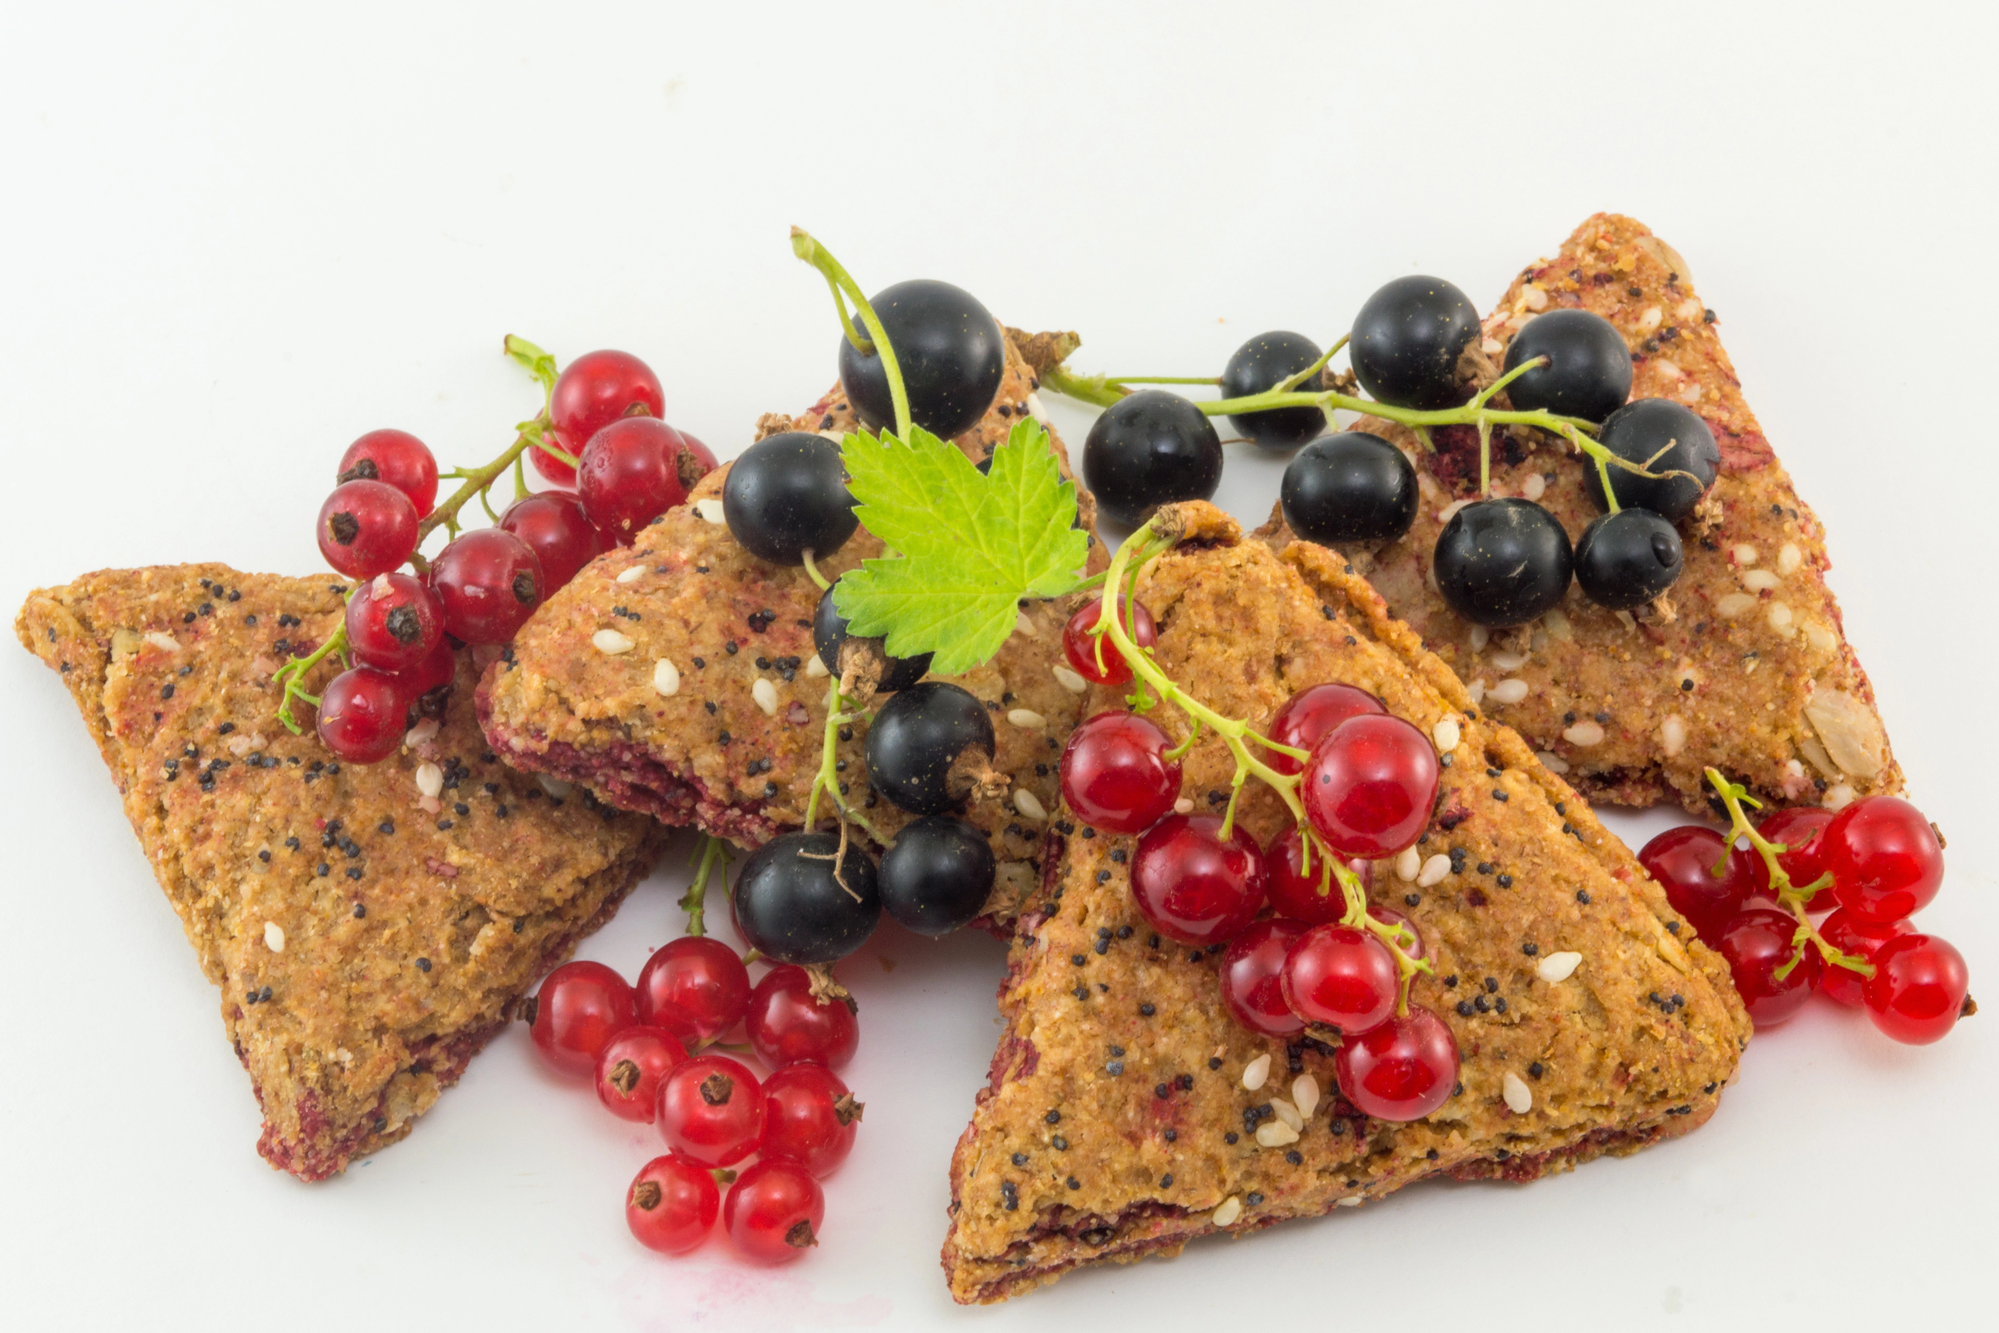 Pulp crackers with fruit